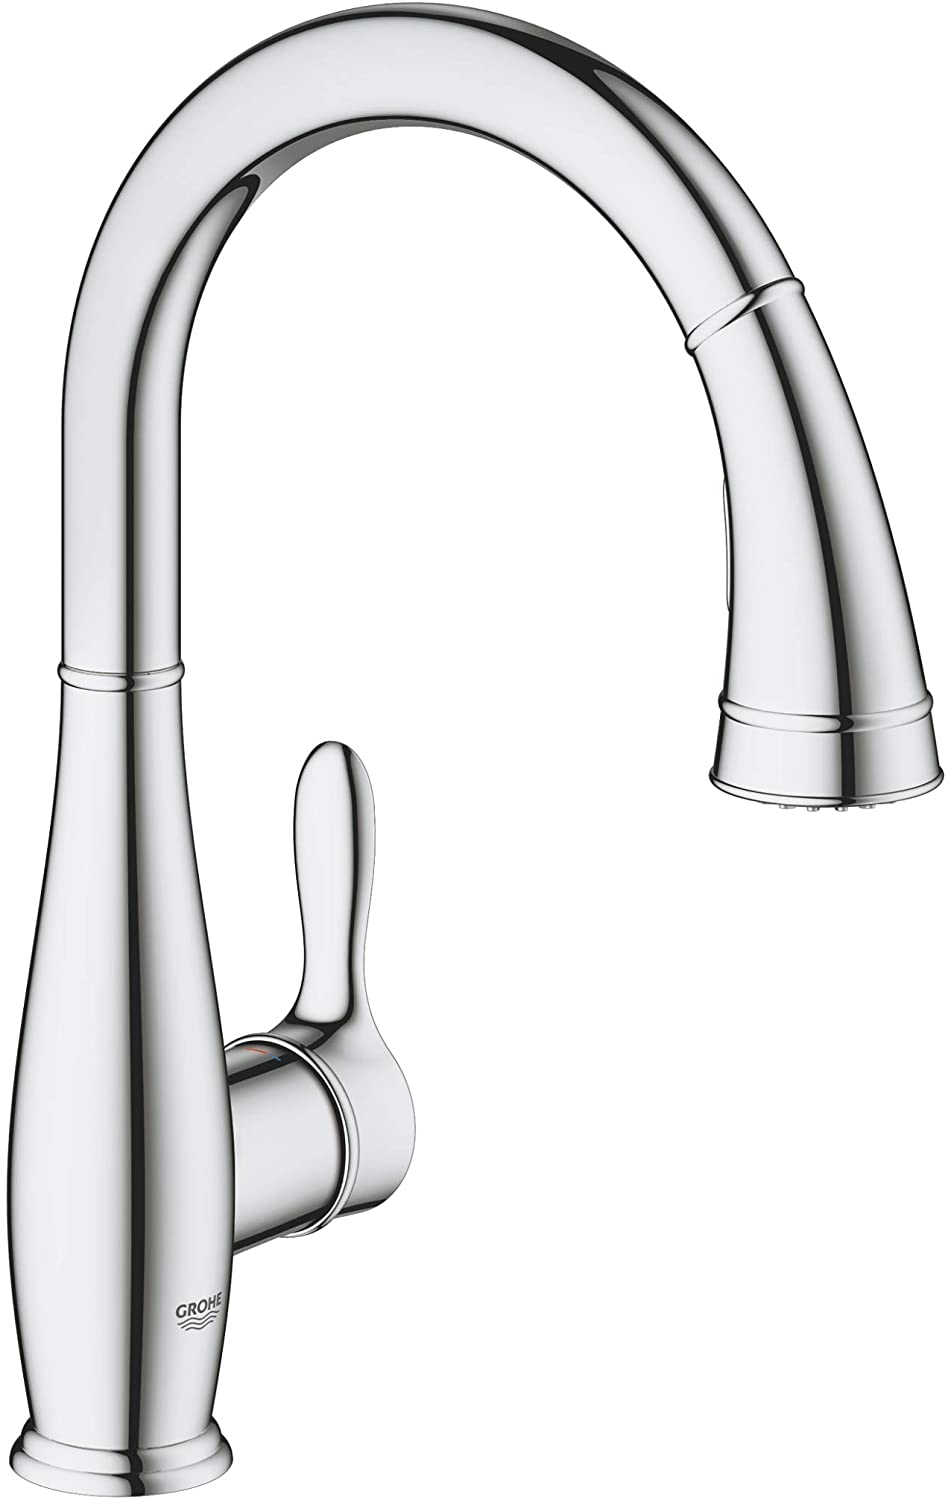 GROHE Parkfield single lever sink mixer, DN 15, swivel pipe spout, colour: super steel - 30215DC1